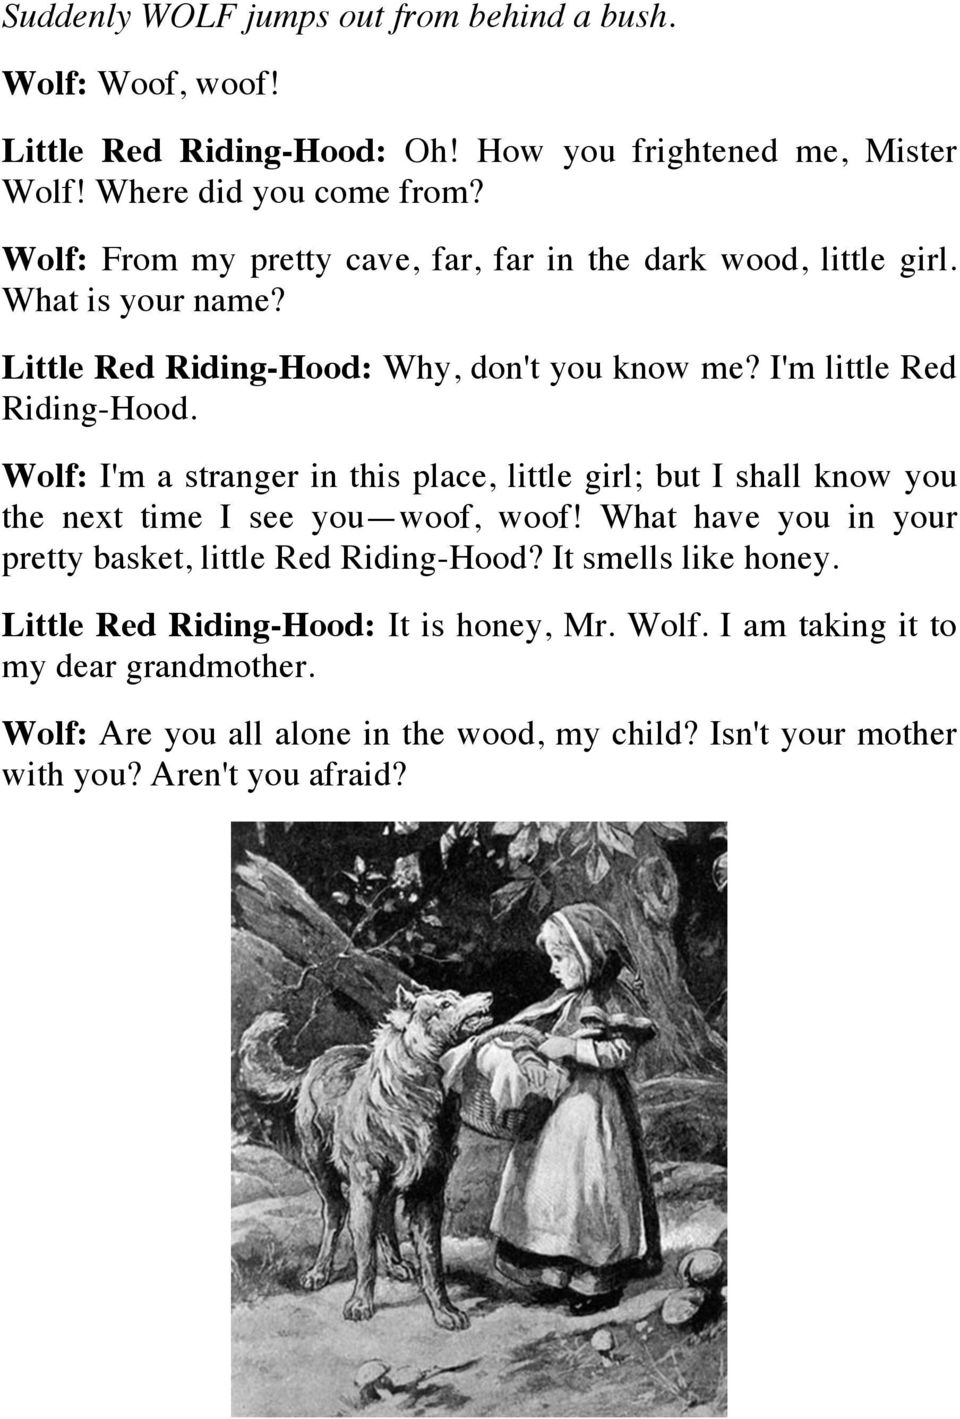 Wolf: I'm a stranger in this place, little girl; but I shall know you the next time I see you woof, woof! What have you in your pretty basket, little Red Riding-Hood?